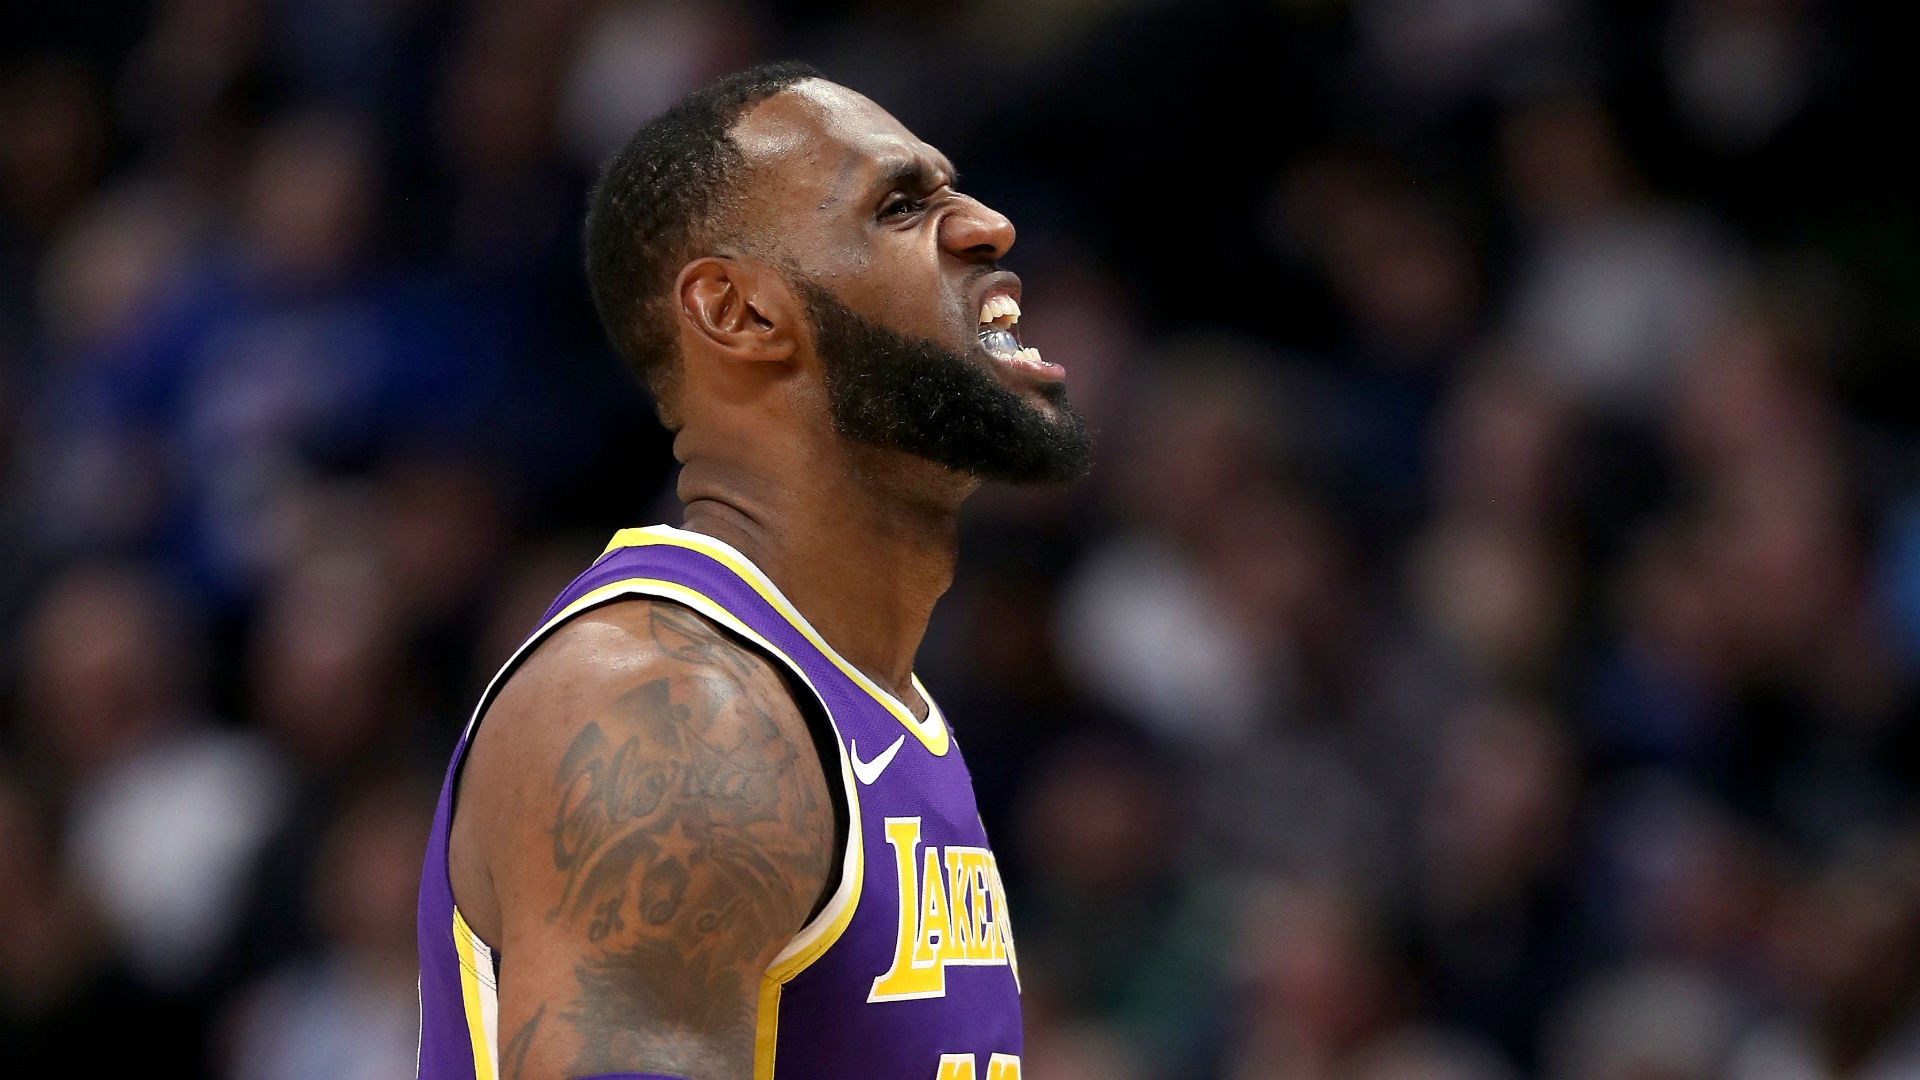 LeBron James helped the Los Angeles Lakers cruise past the Memphis Grizzlies in the NBA.